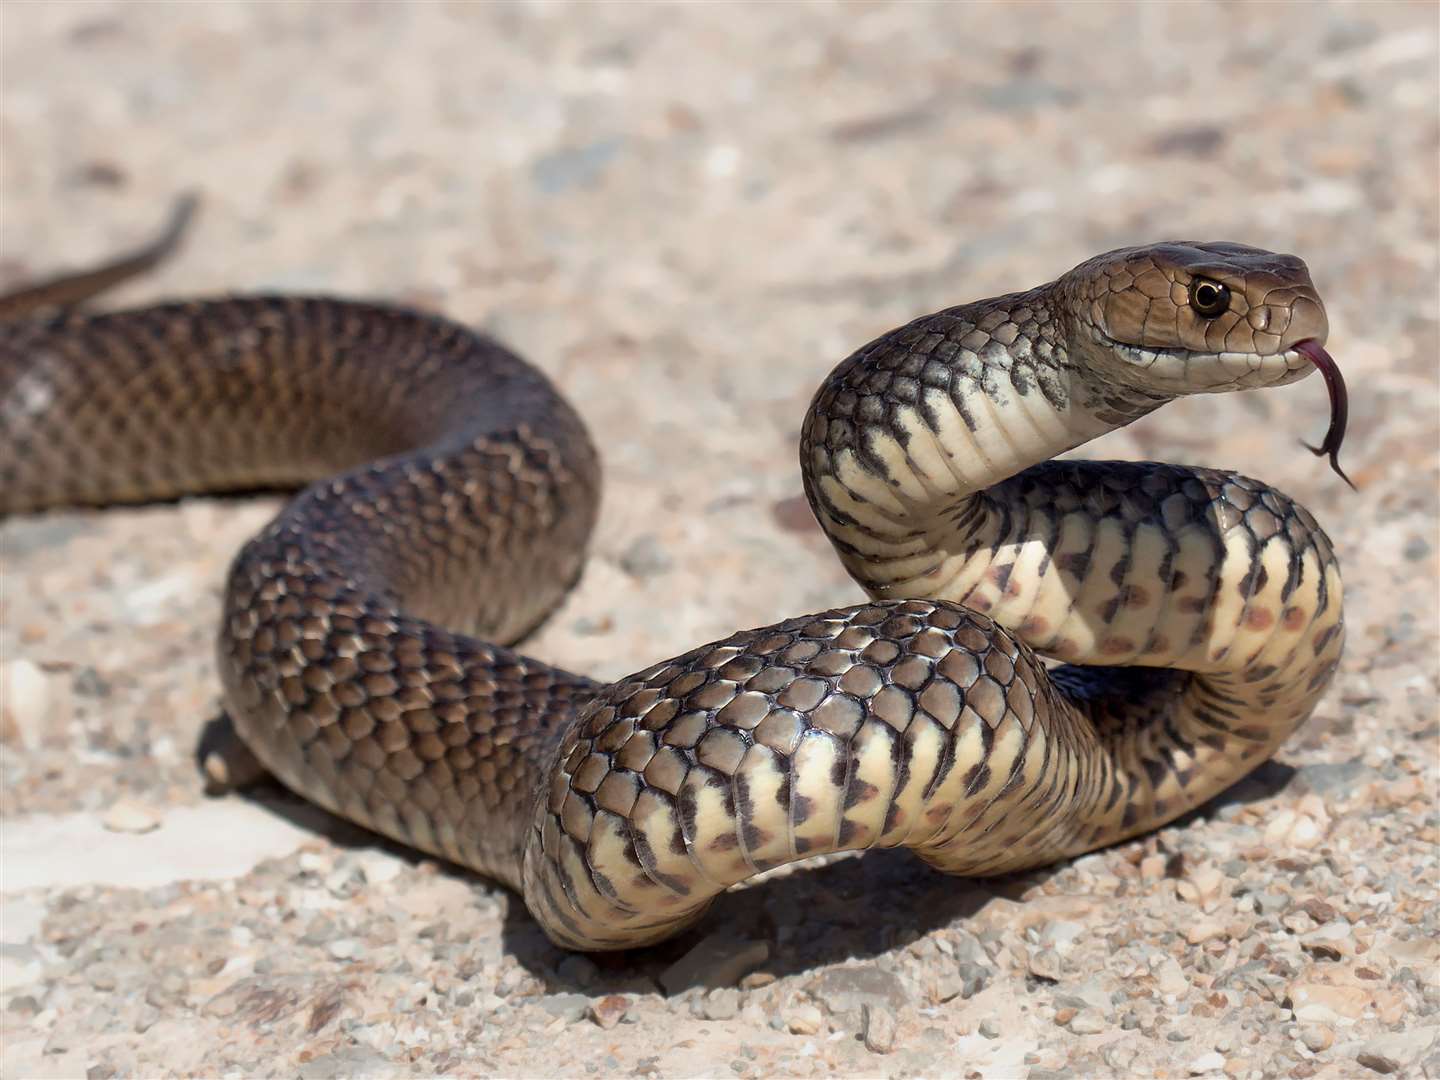 The RSPCA warned reptile owners to remain vigilant to escapees. Image: iStock.